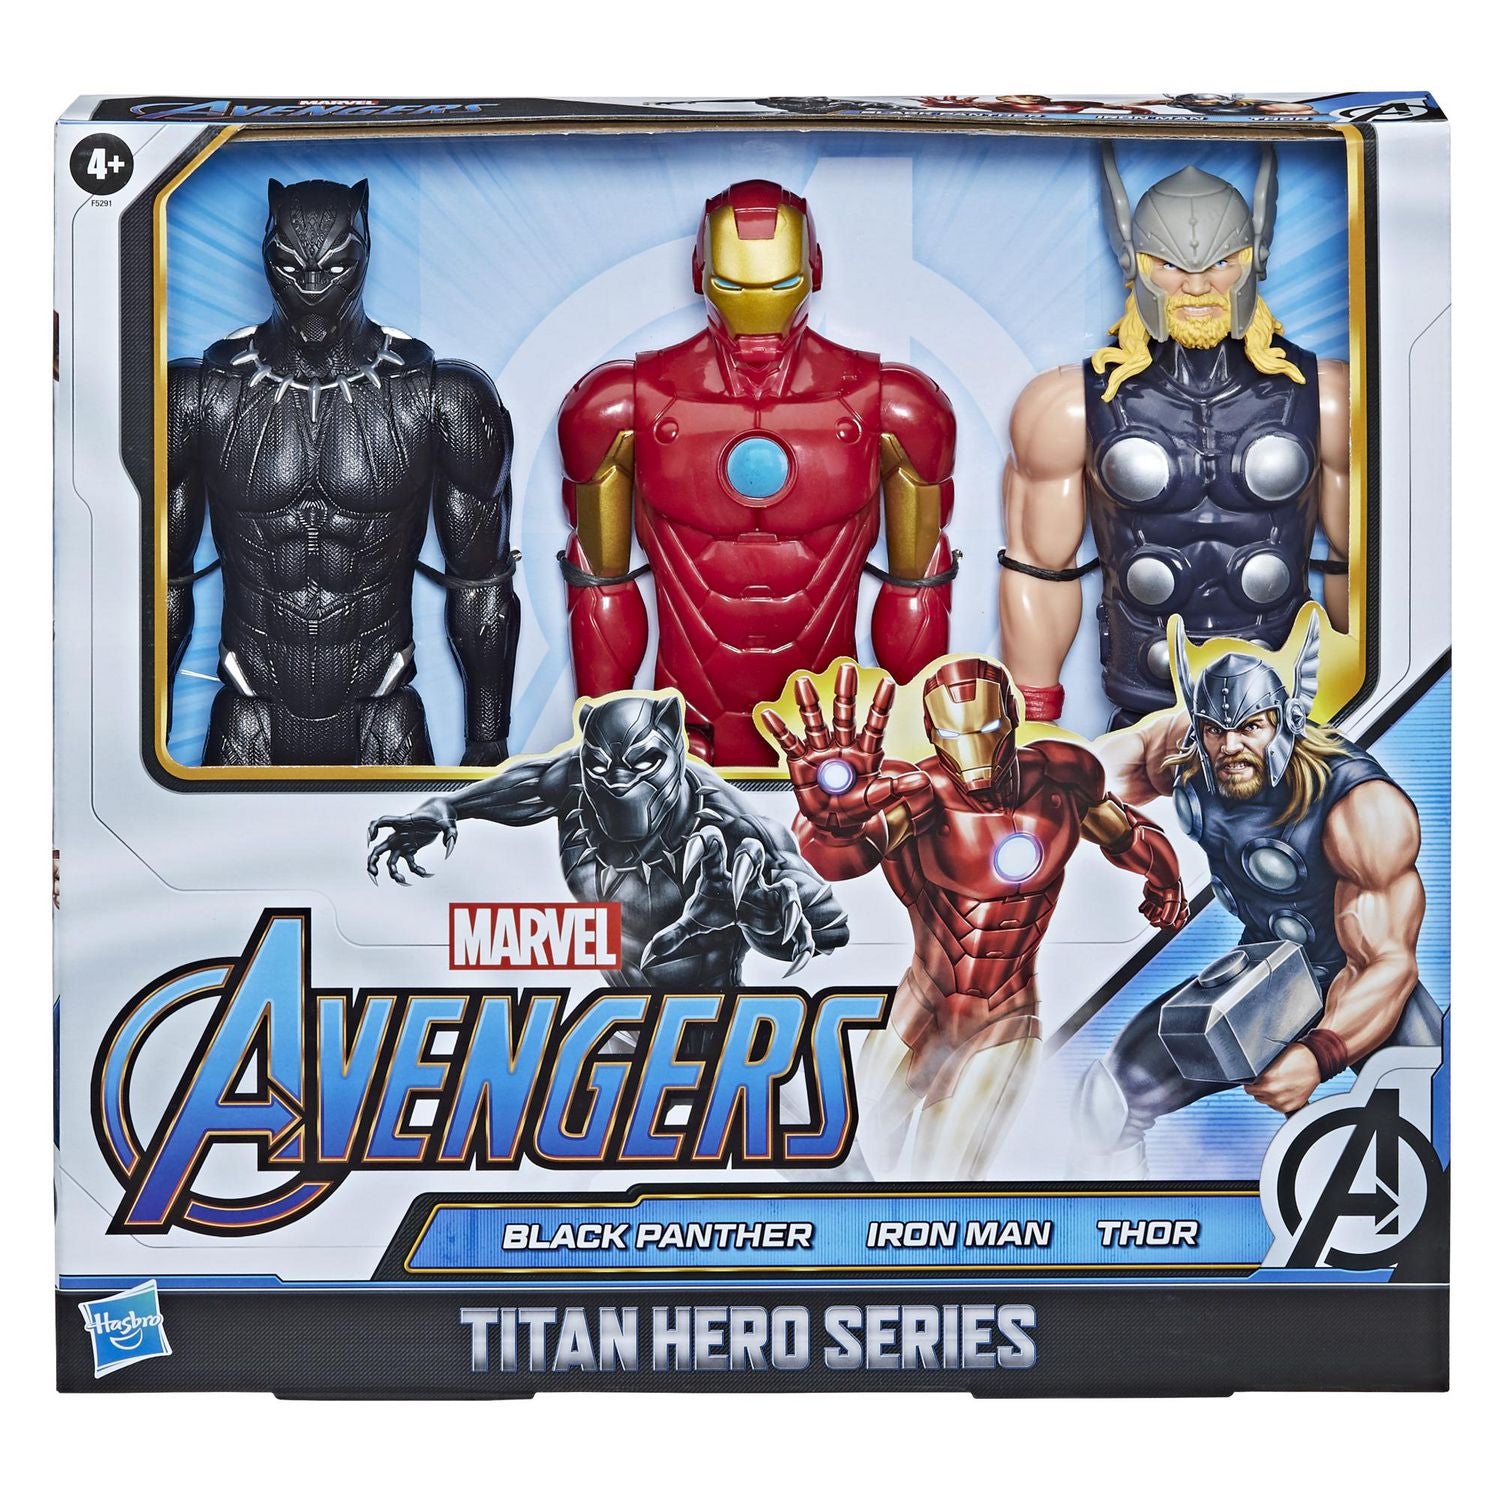 Marvel Avengers Titan Hero Series 12 inch Black Panther, Iron Man and Thor 3-Pack Figure Set